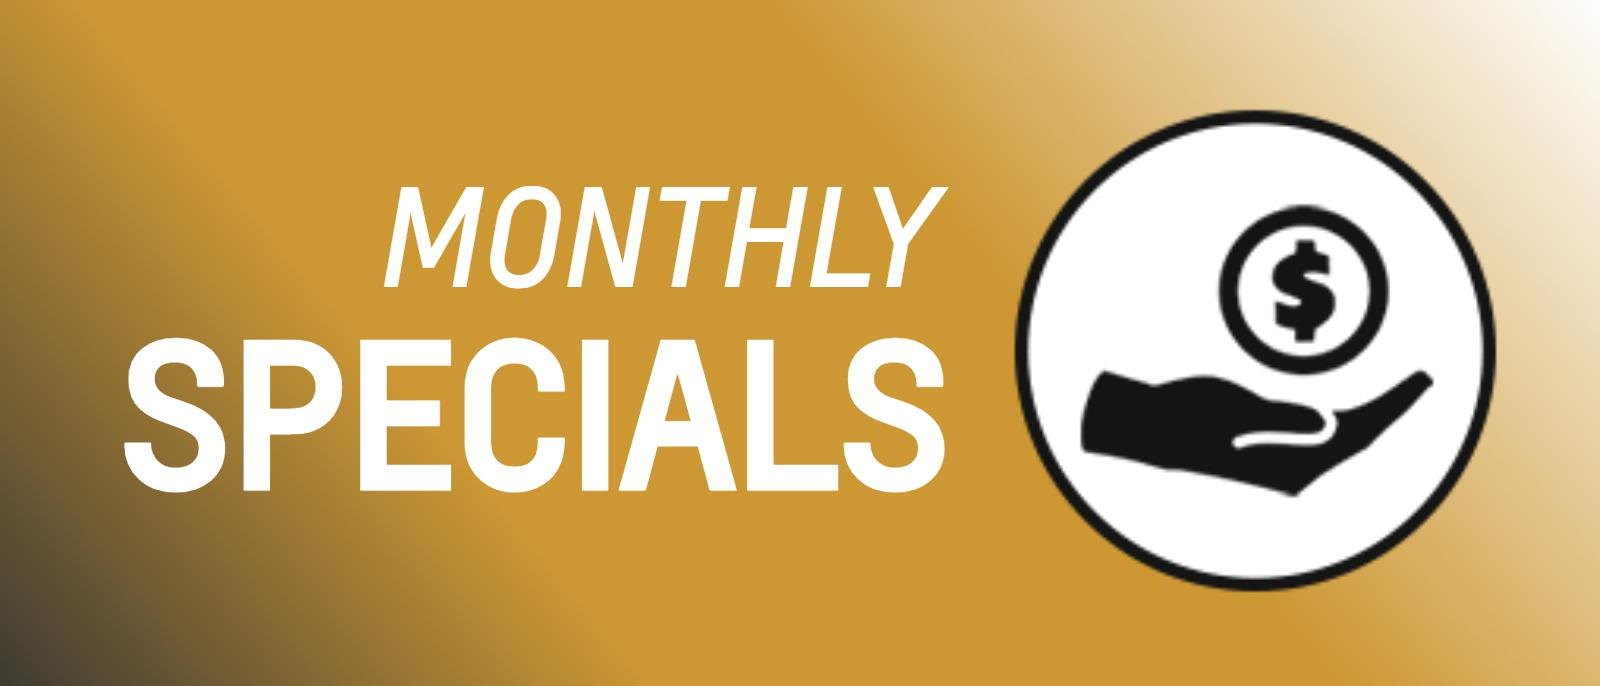 UX Tile Monthly Specials